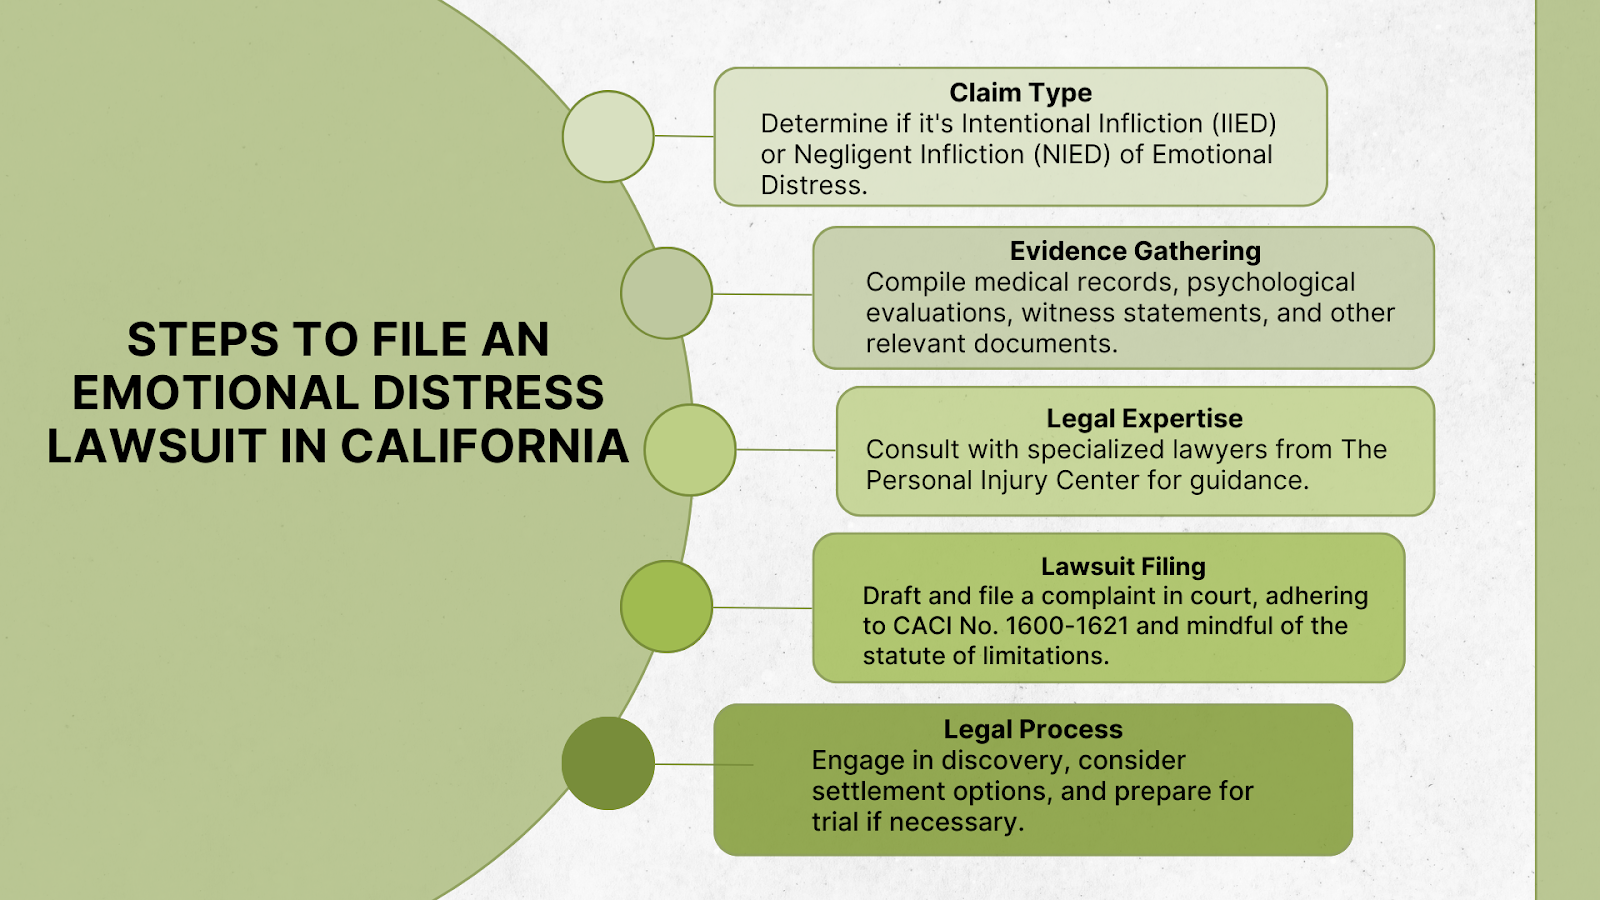 Steps to File an Emotional Distress Lawsuit in California